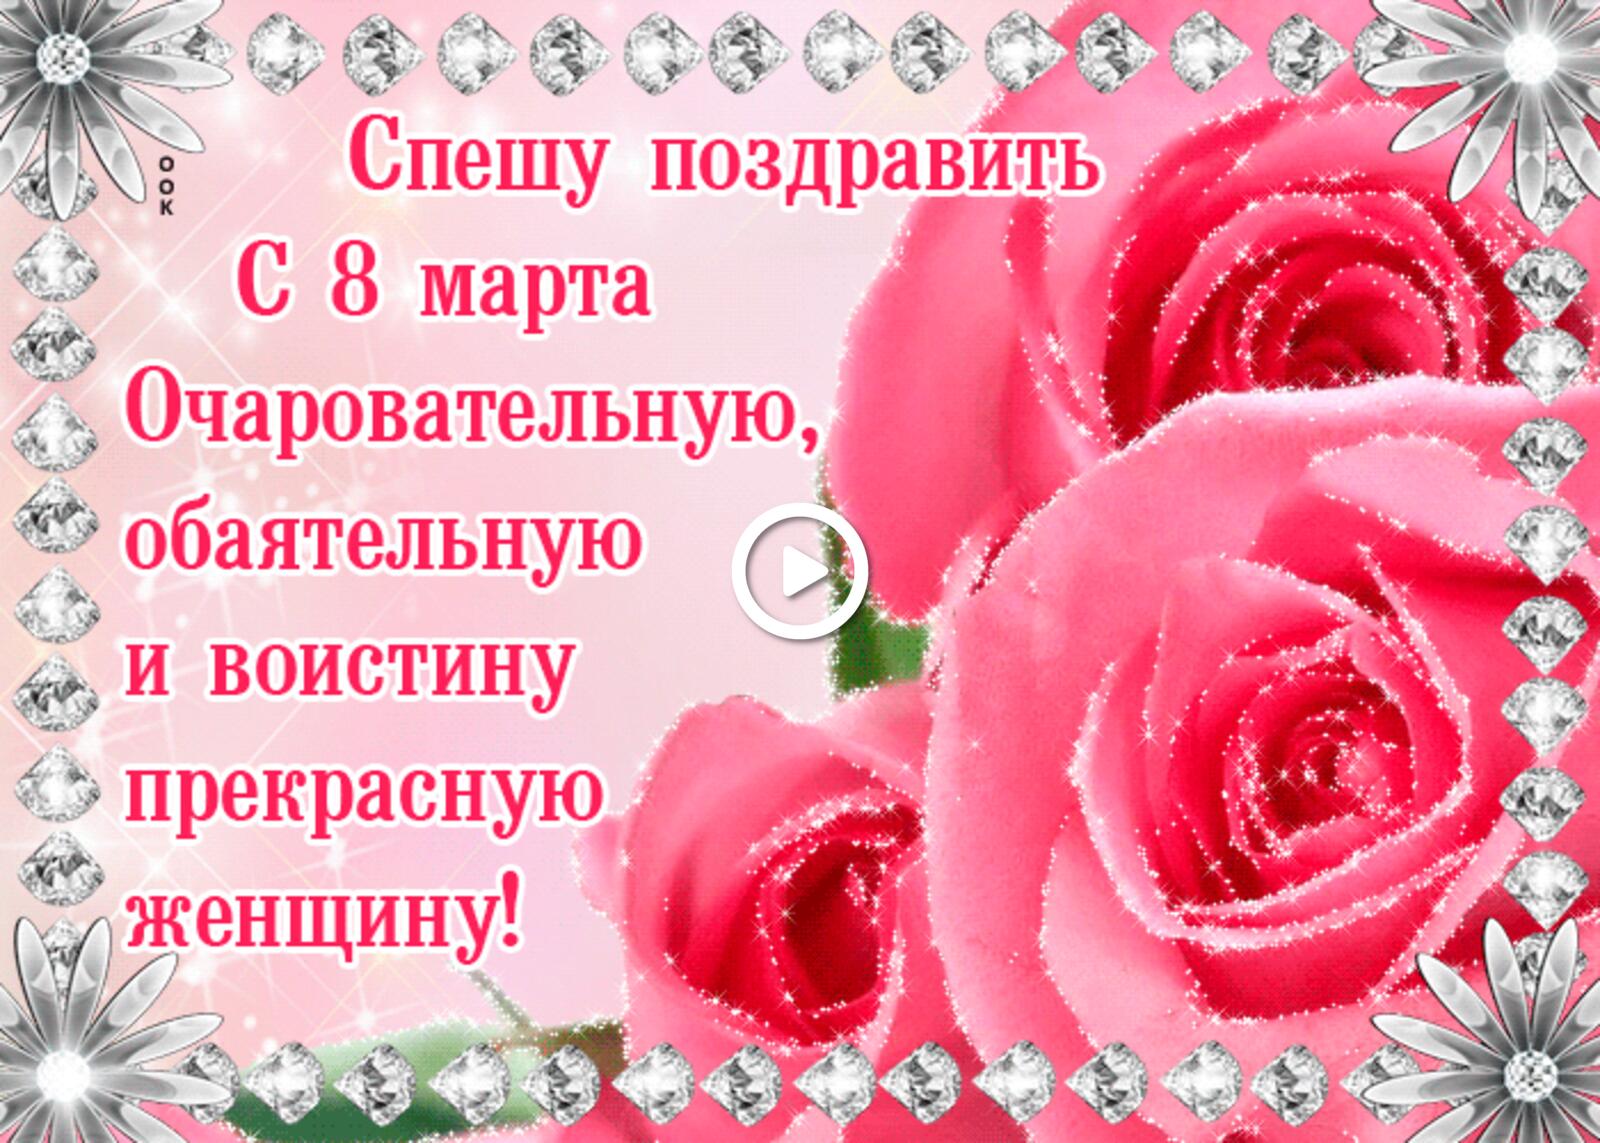 A postcard on the subject of women`s day from March 8 holidays for free